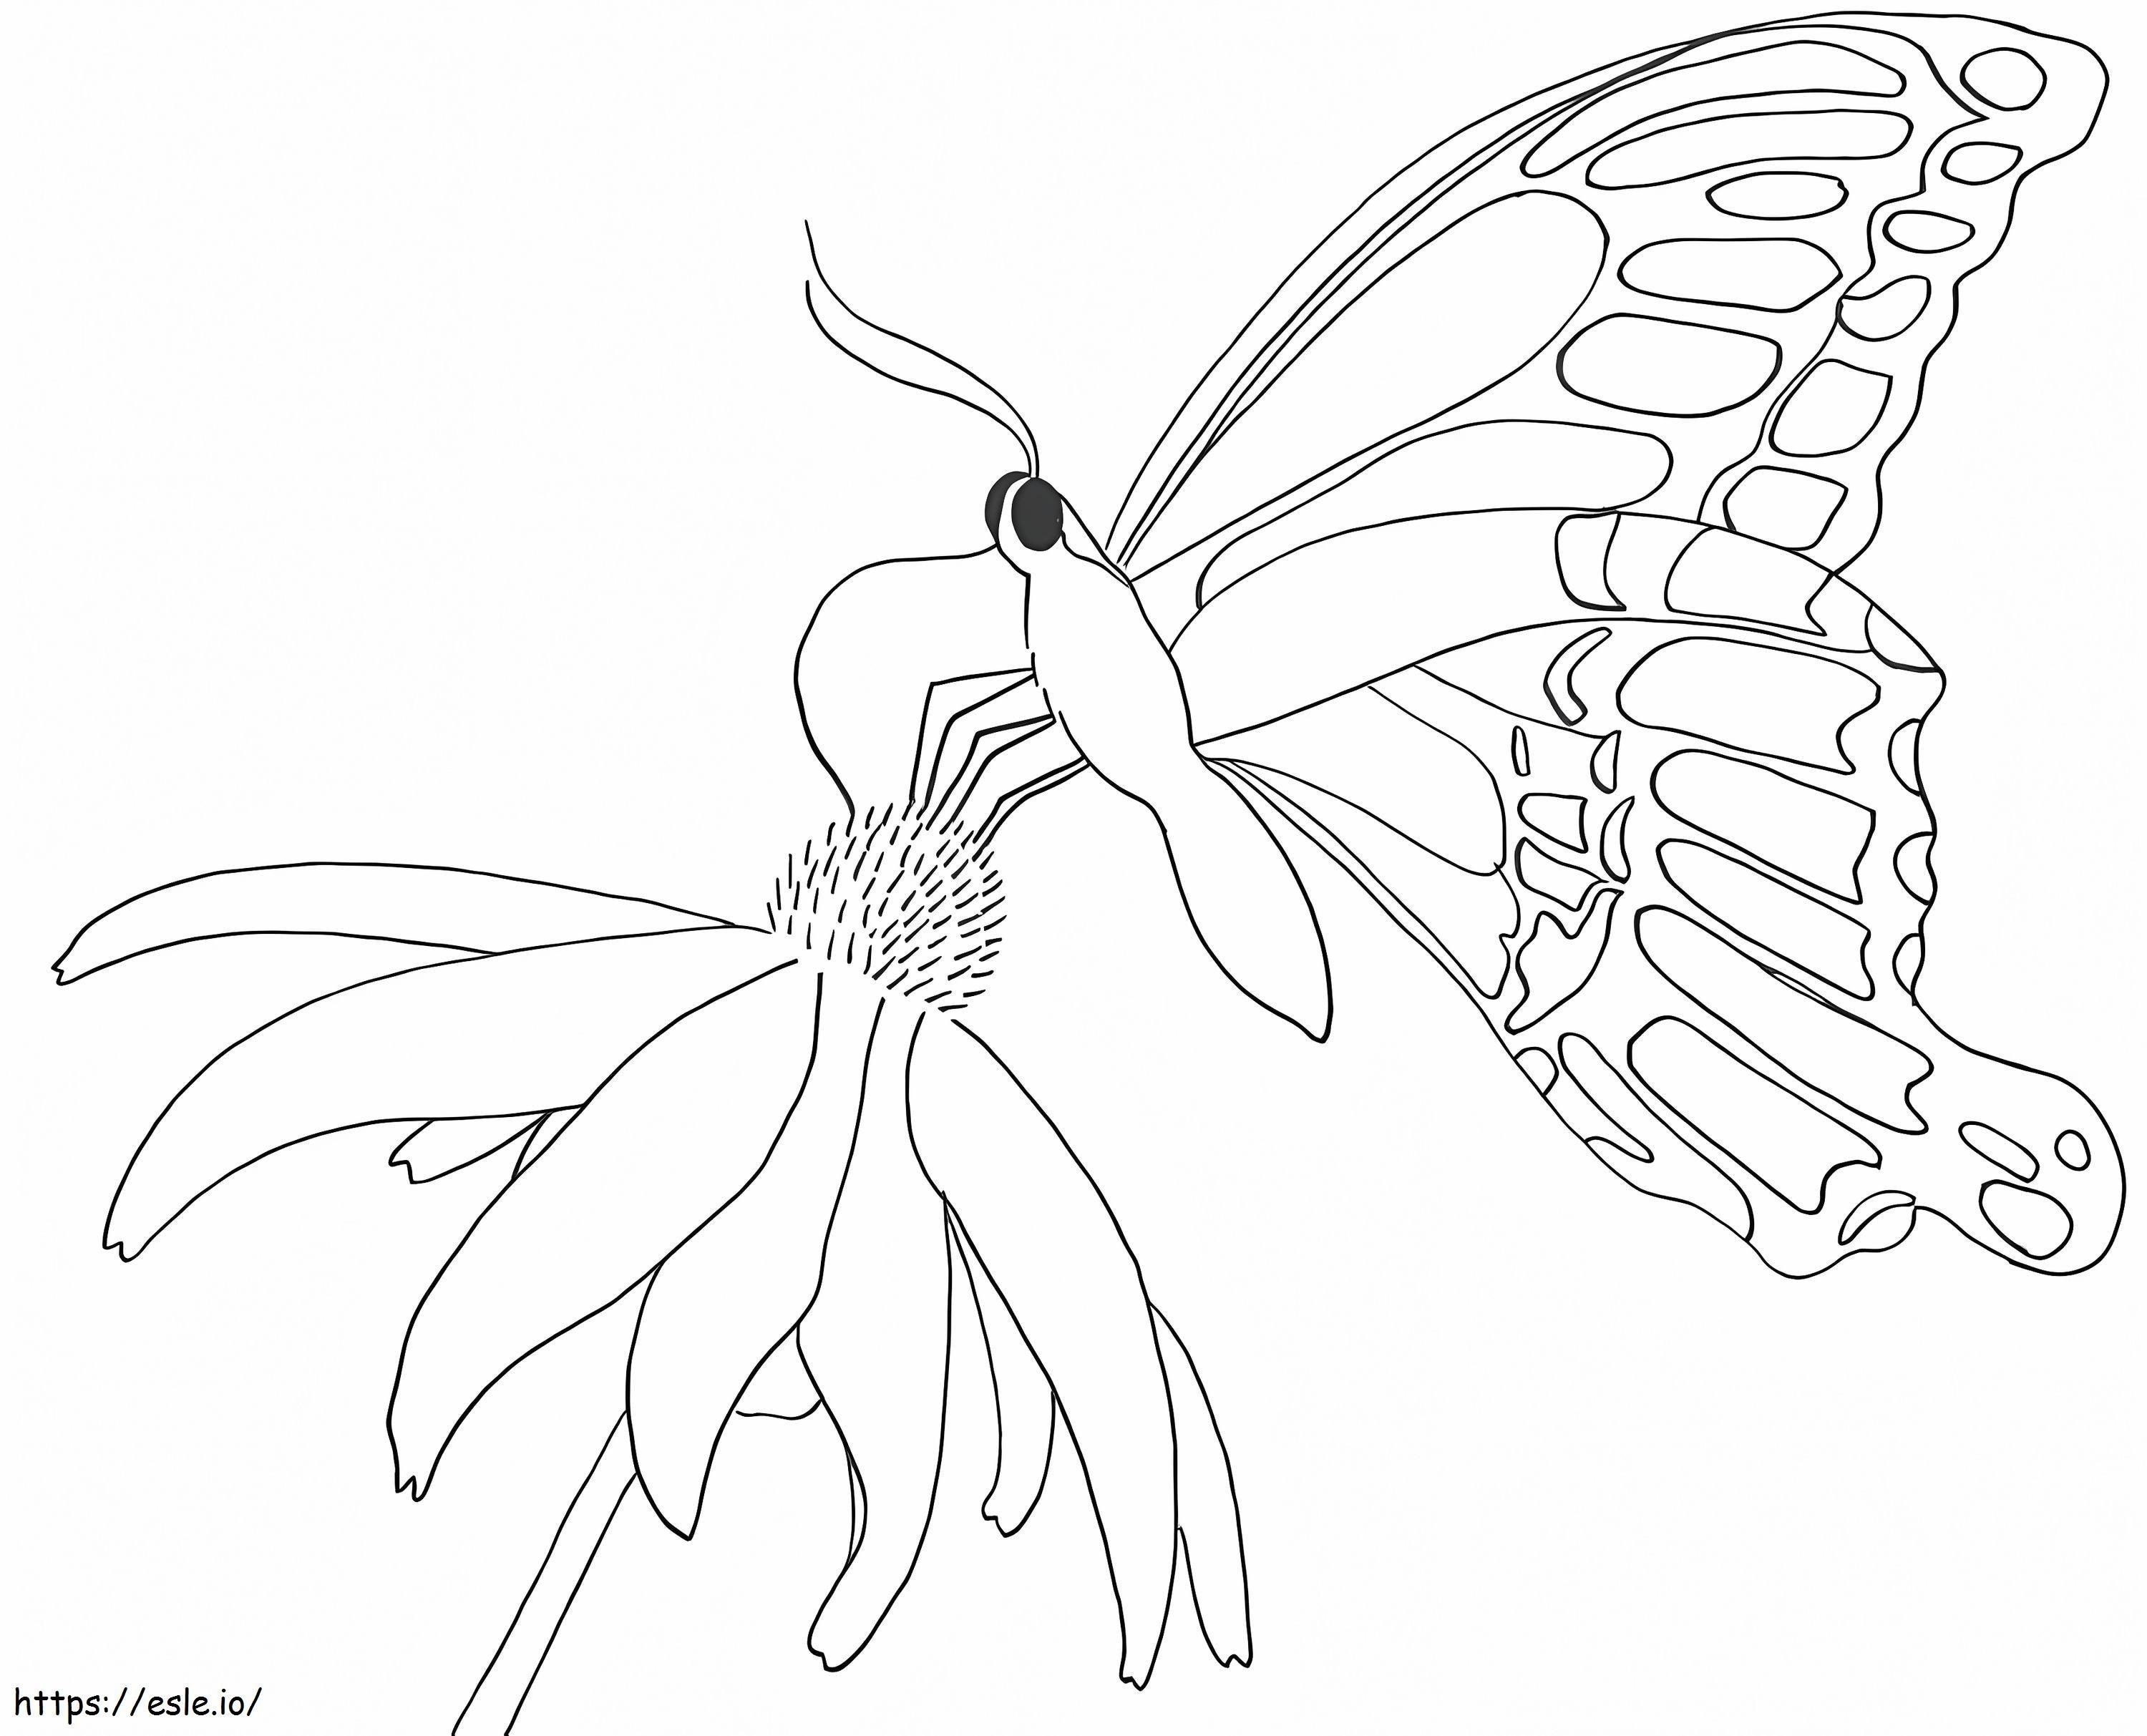 Butterfly On Daisy coloring page